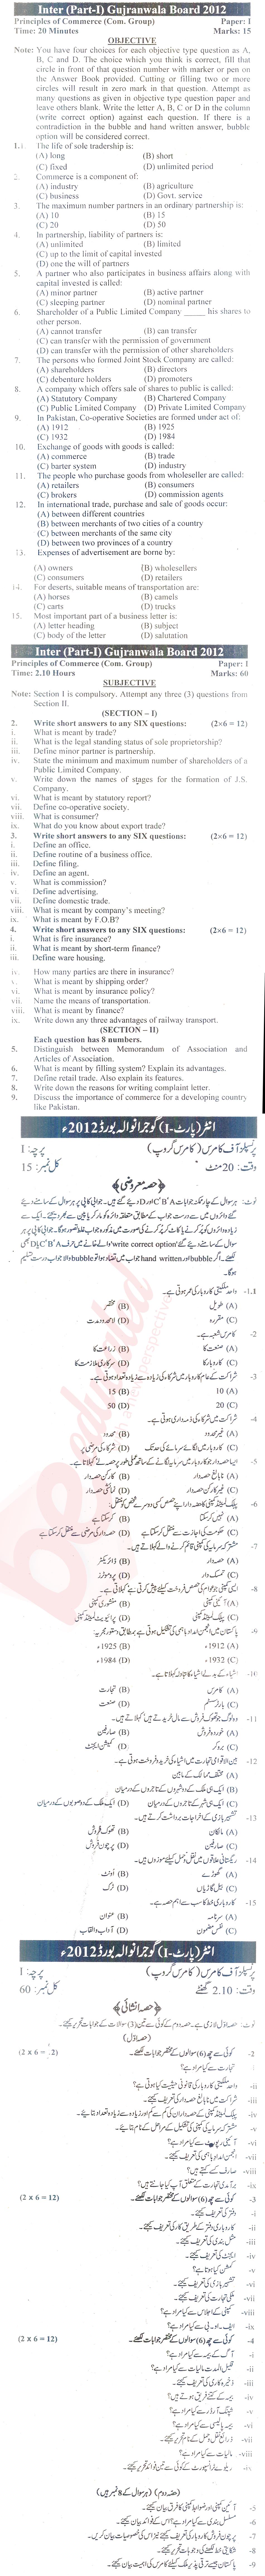 Principles of Commerce ICOM Part 1 Past Paper Group 1 BISE Gujranwala 2012